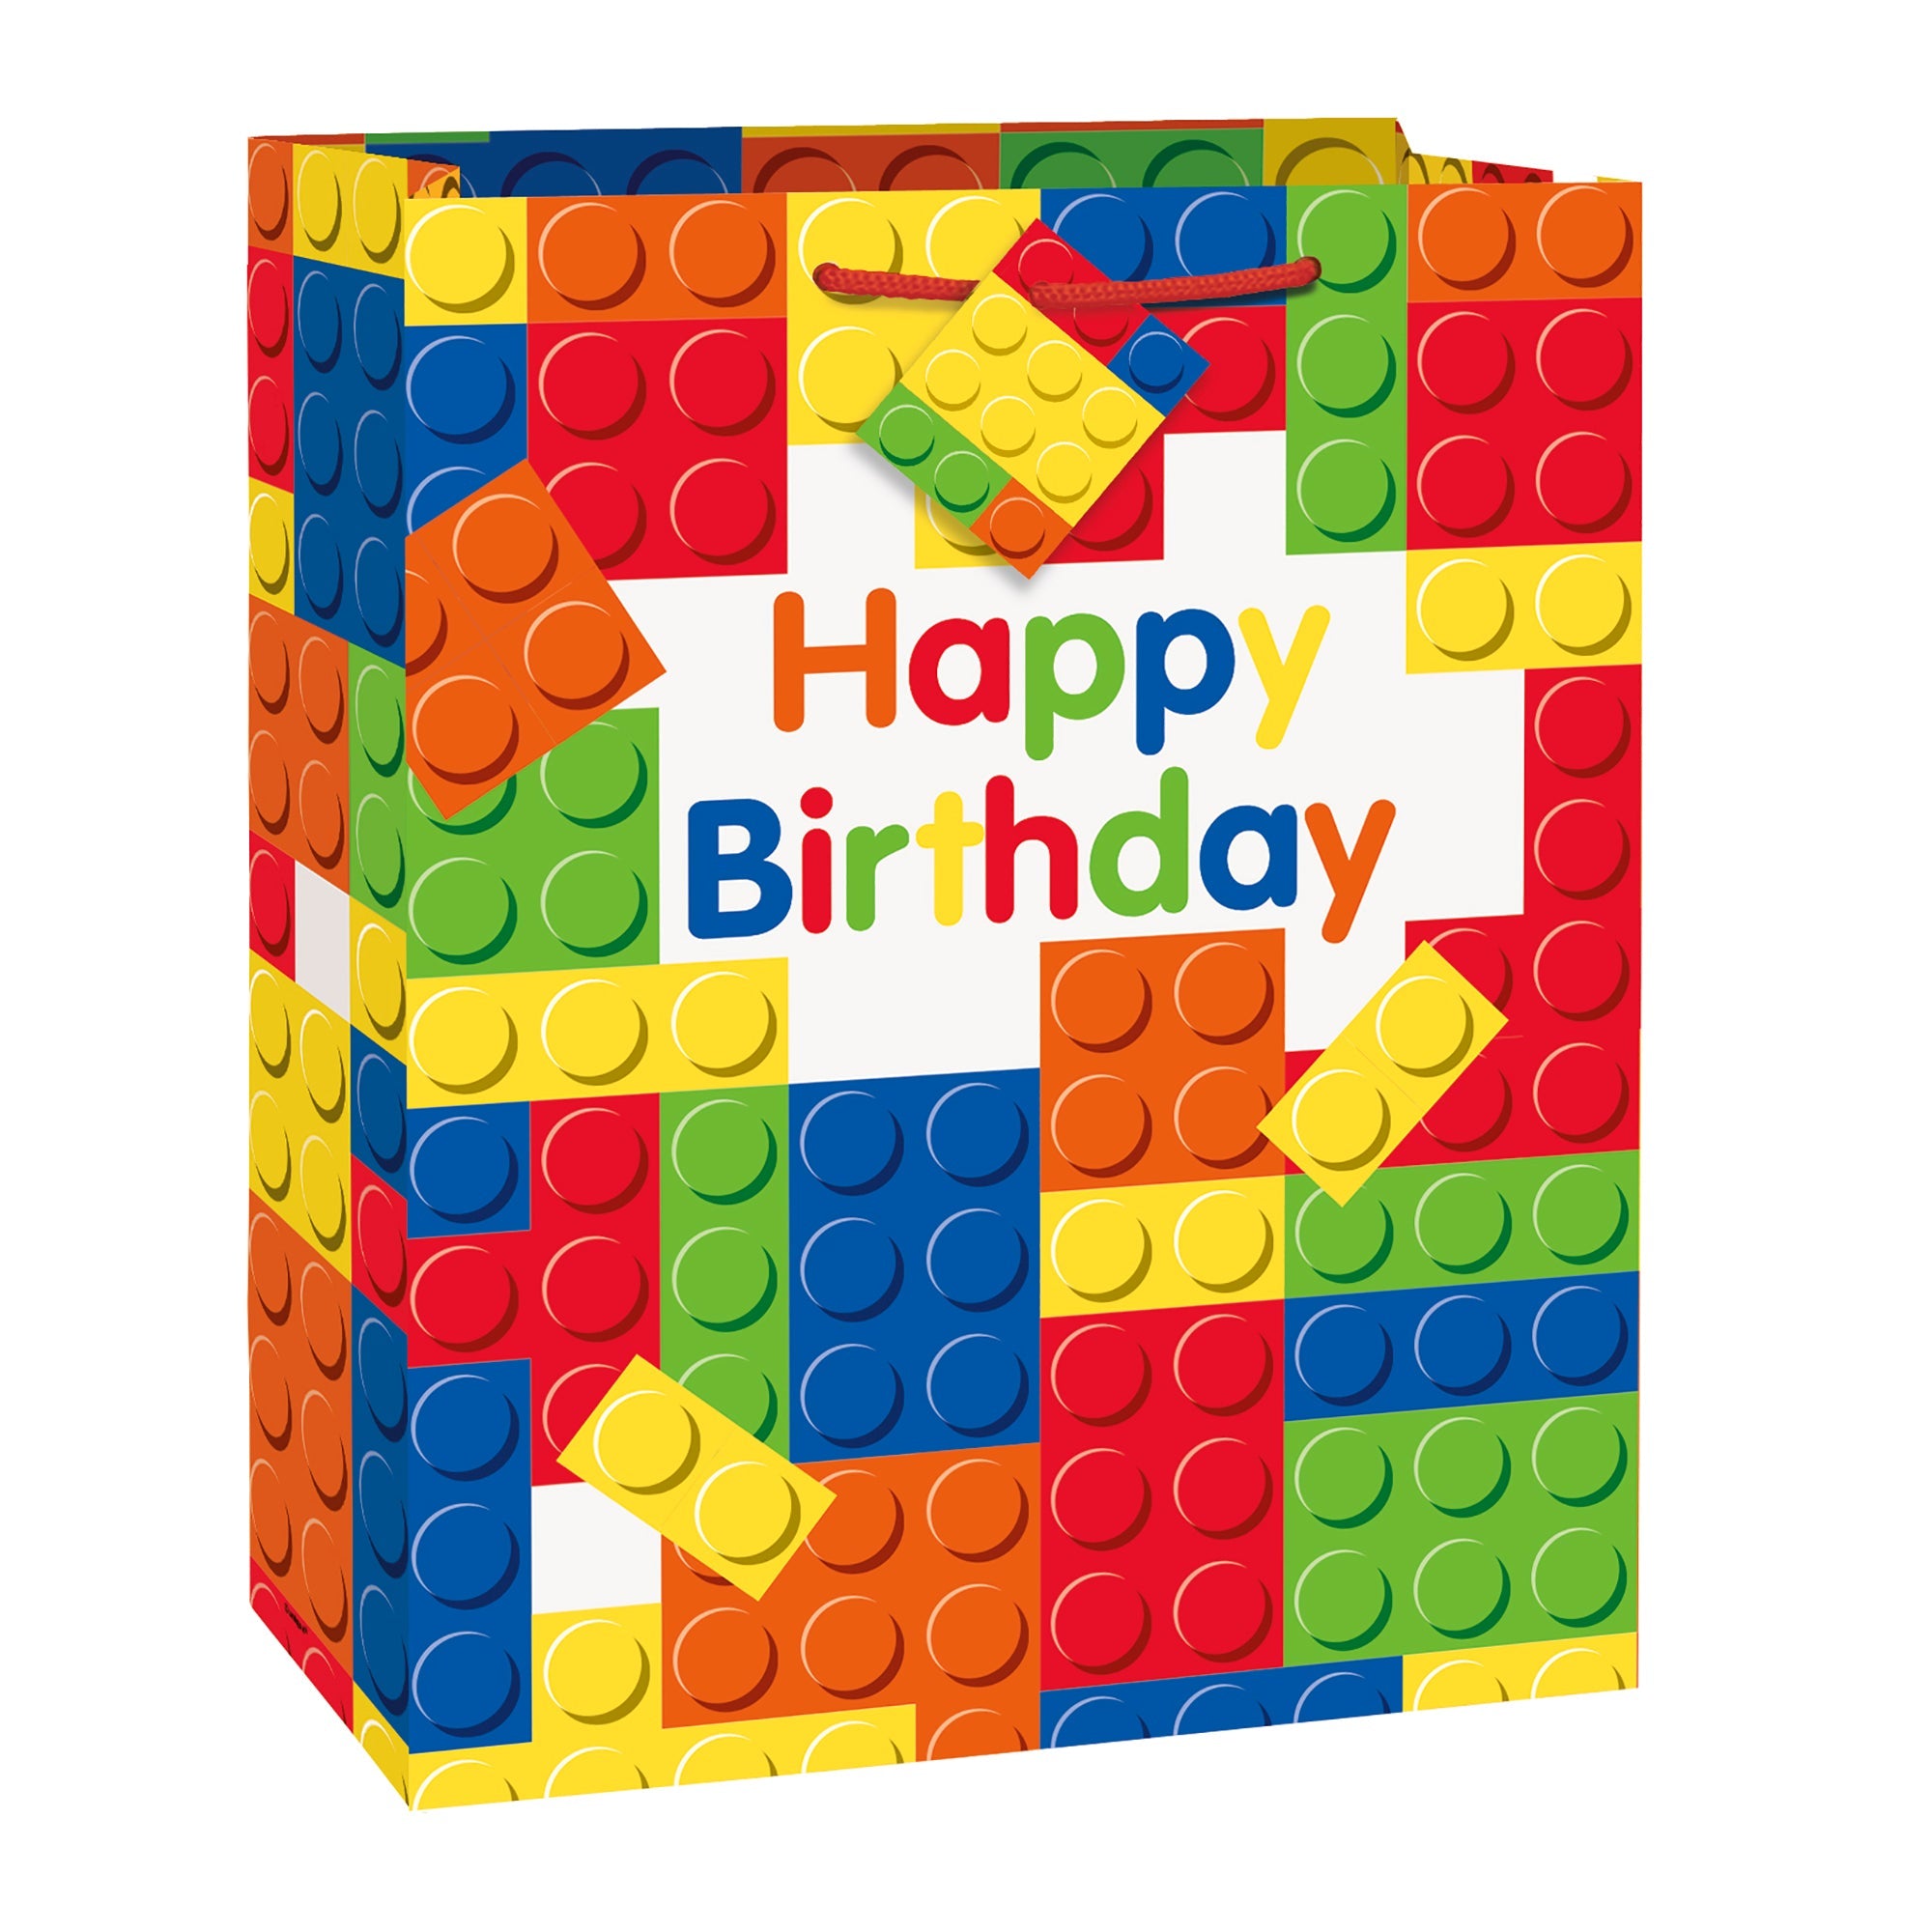 Lego Blocks Gift Bag Large 10.5Wx 13Hx5.5D in